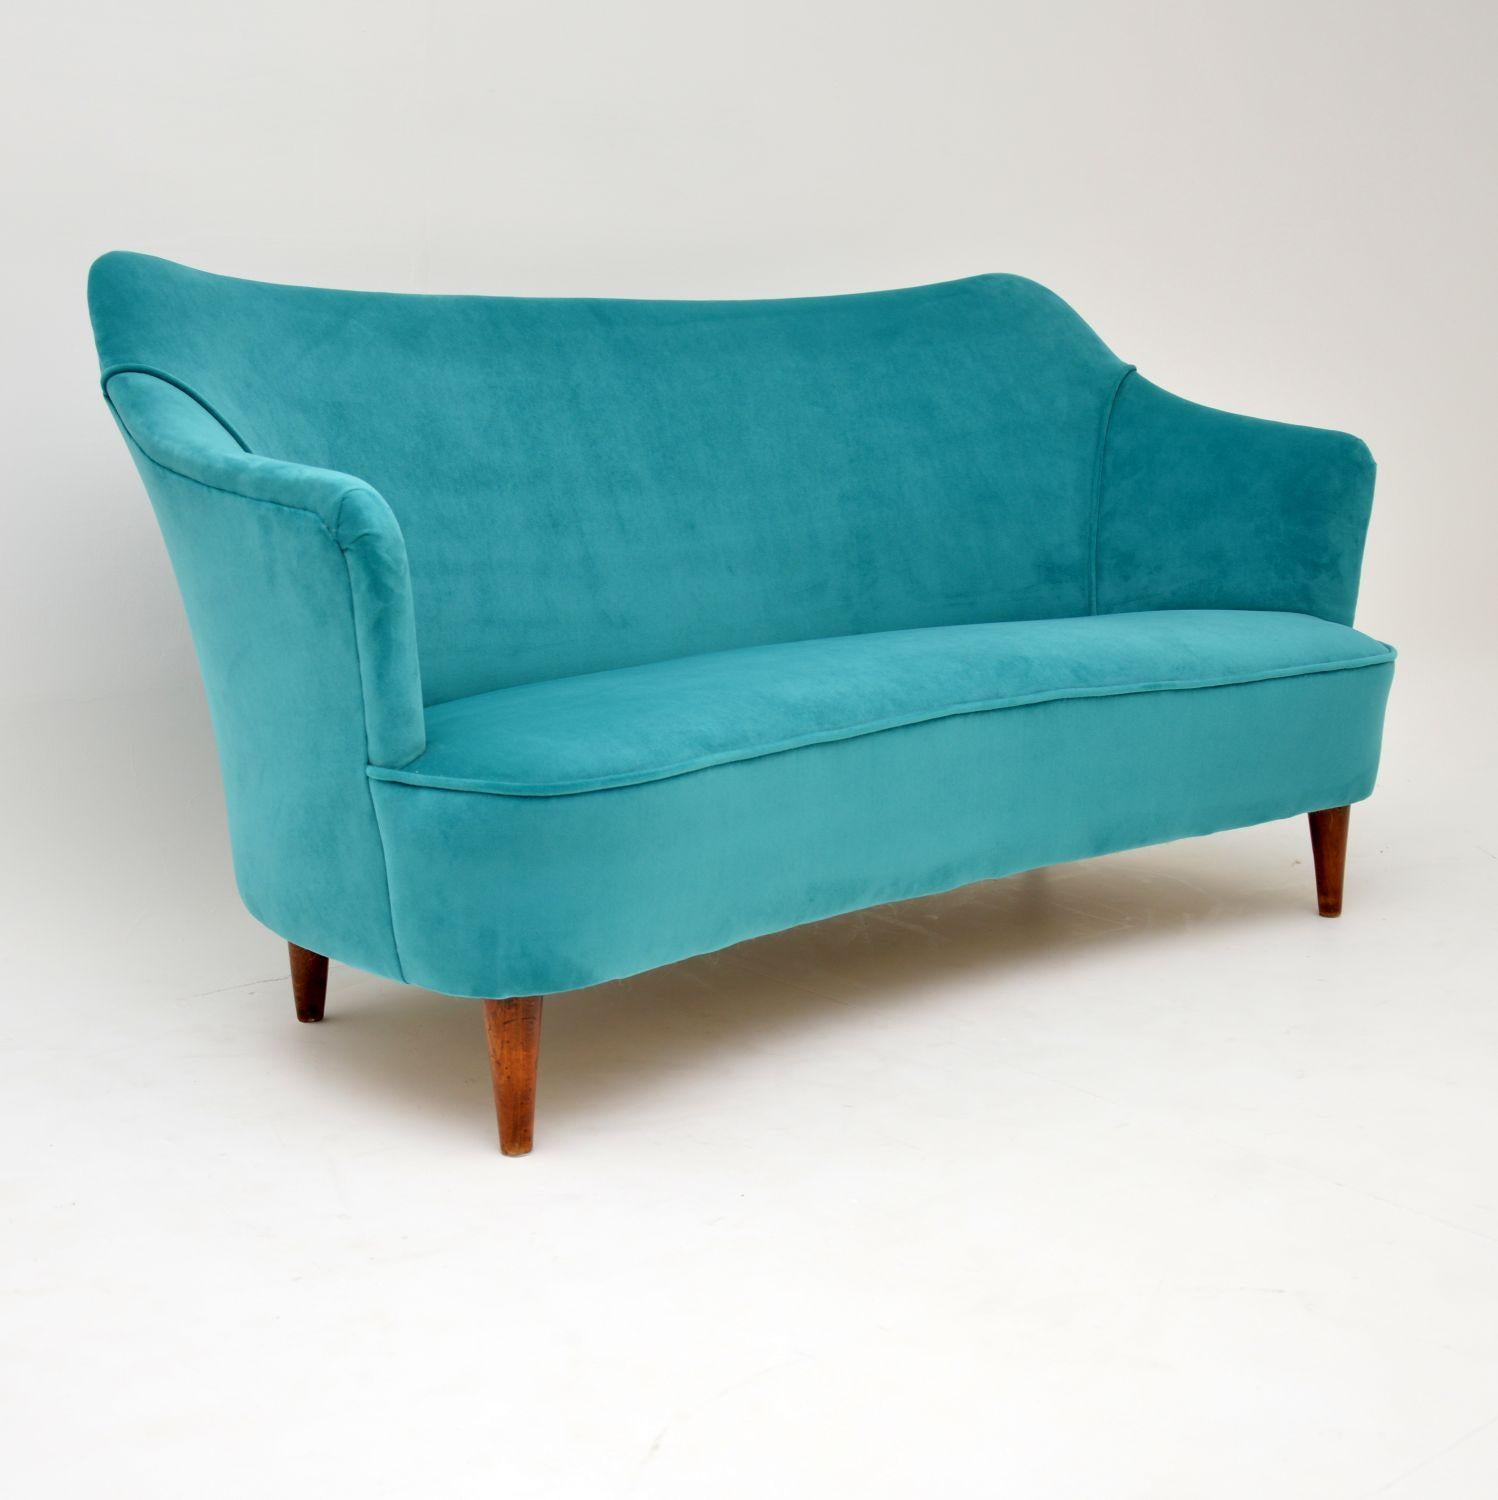 A stunning vintage cocktail sofa, this was made in Italy and dates from the 1960s. This is quite small and might have been intended as a child’s sofa. It can seat two adults, but as a perched love seat rather than a lounger. It is very well made and